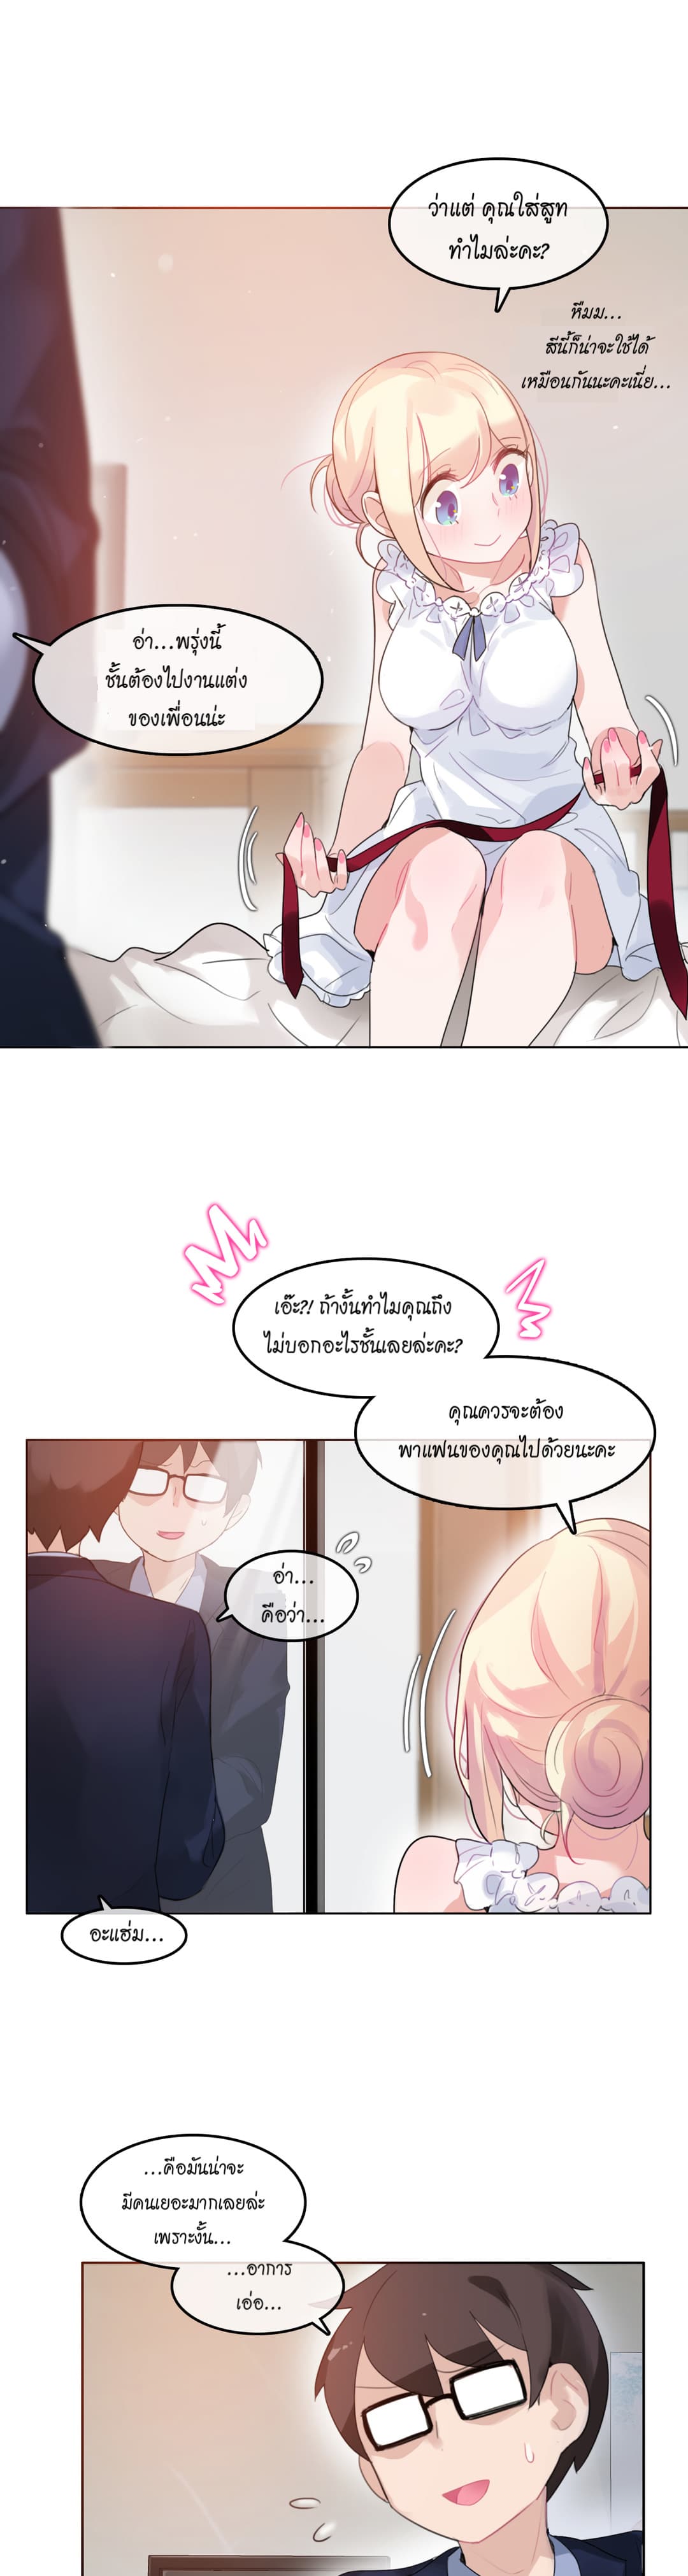 A Pervert’s Daily Life 42 (4)